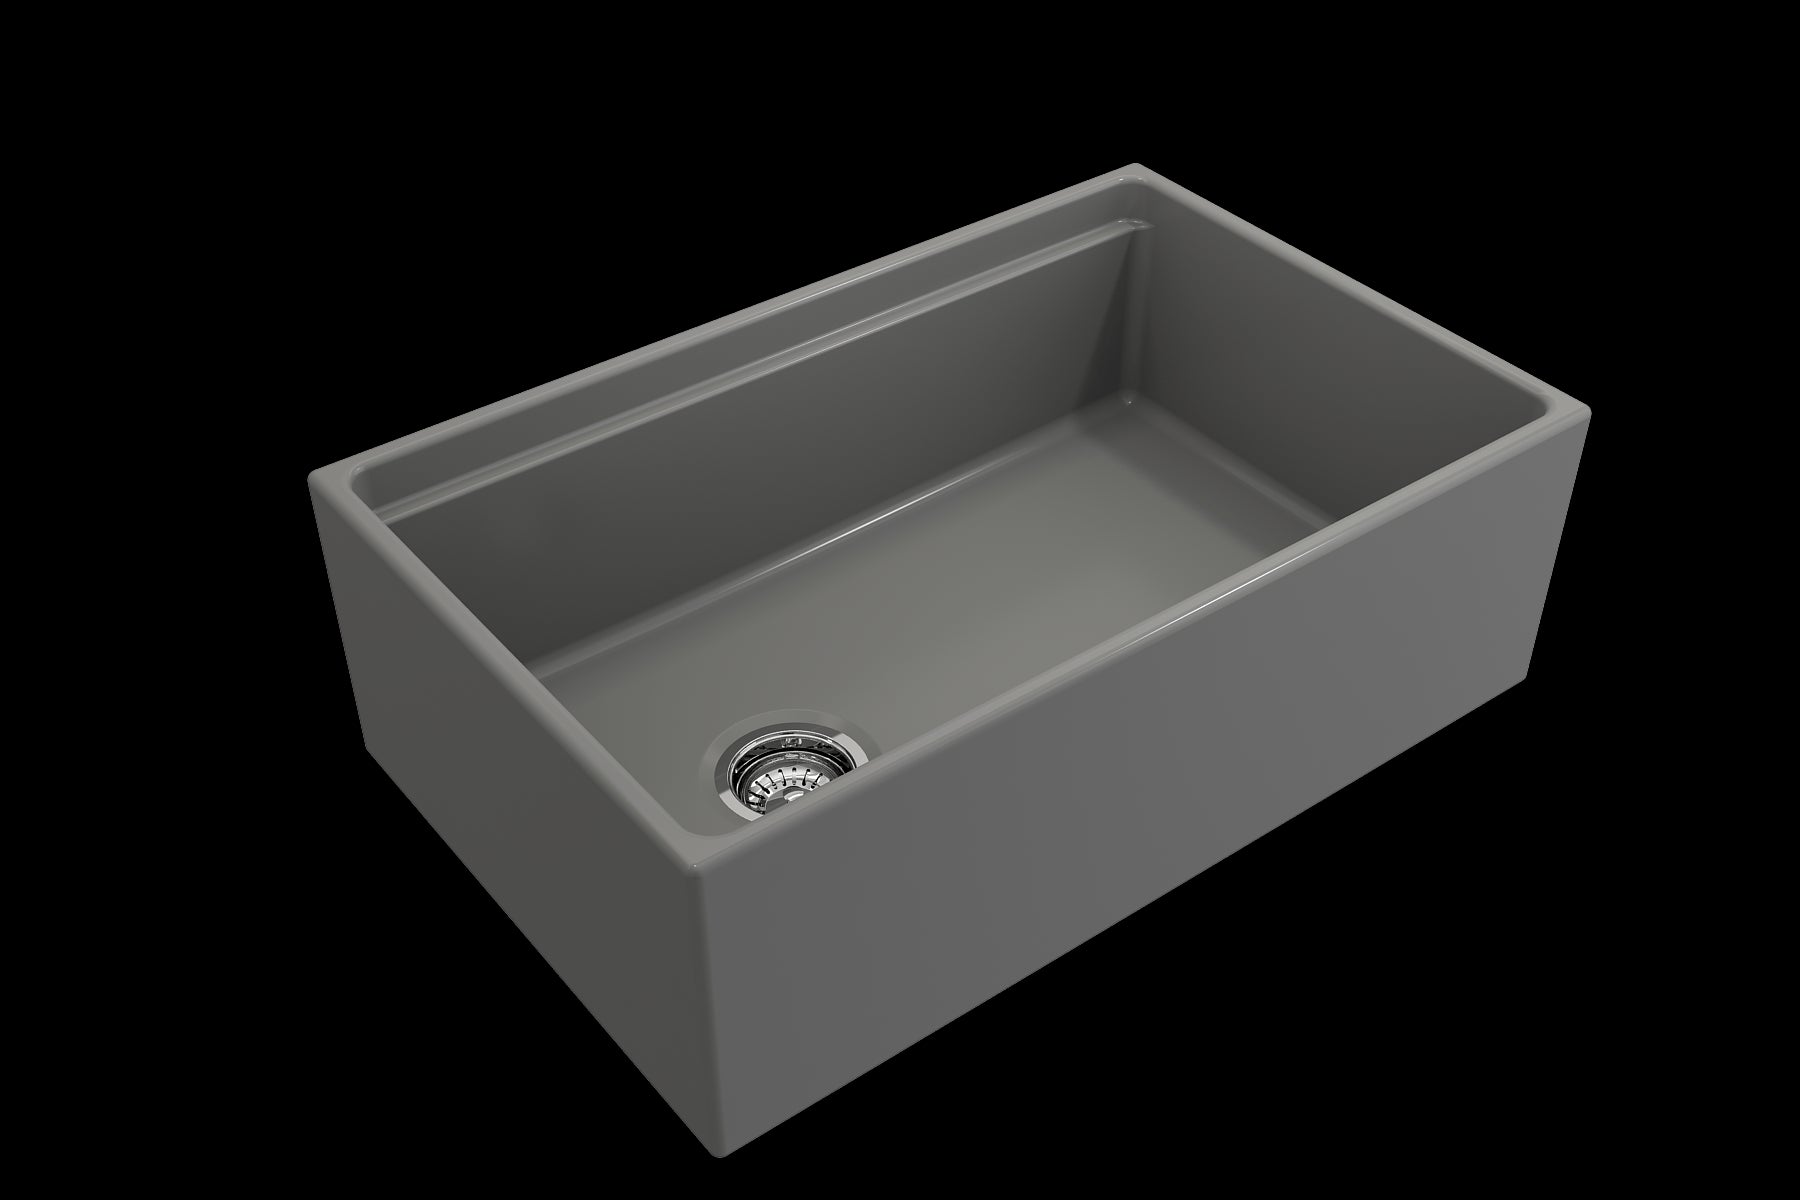 BOCCHI CONTEMPO 30" Fireclay Farmhouse Step Rim With Integrated Work Station Single Bowl Kitchen Sink With Accessories - Matte Gray